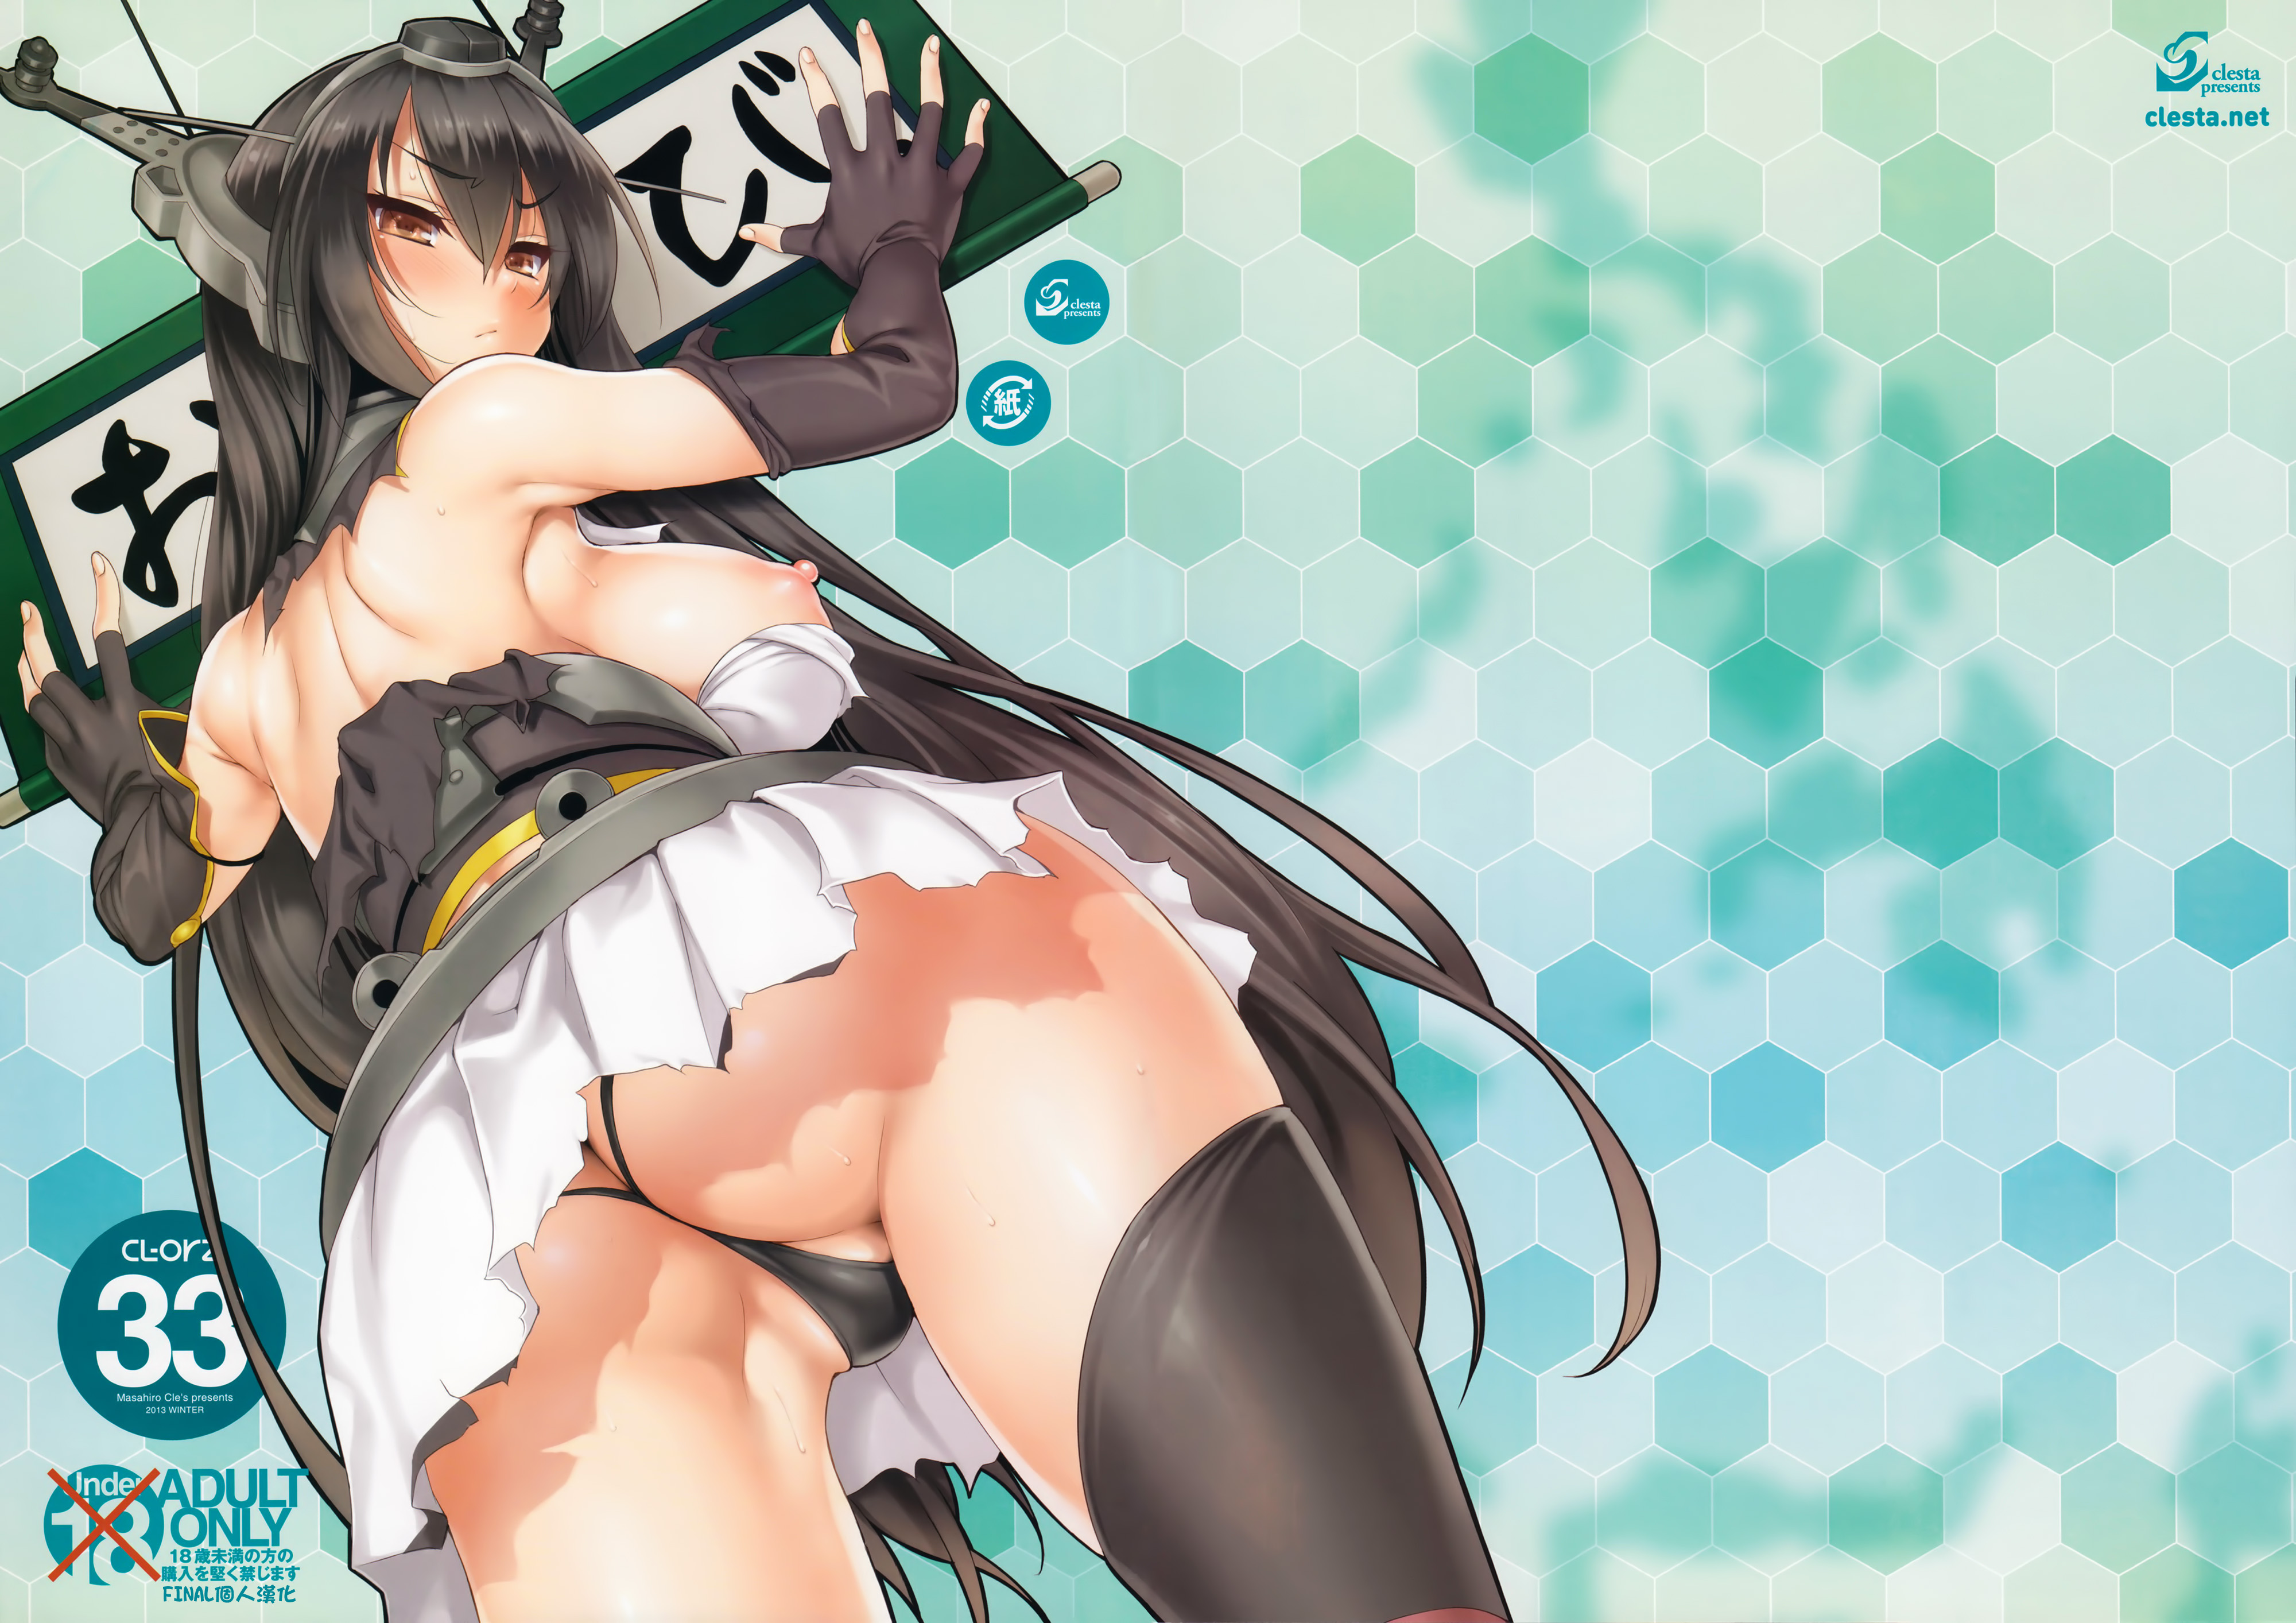 C85 clesta Cle Masahiro CL orz 33 Kantai Collection KanColle Chinese final個人漢化 Decensored00